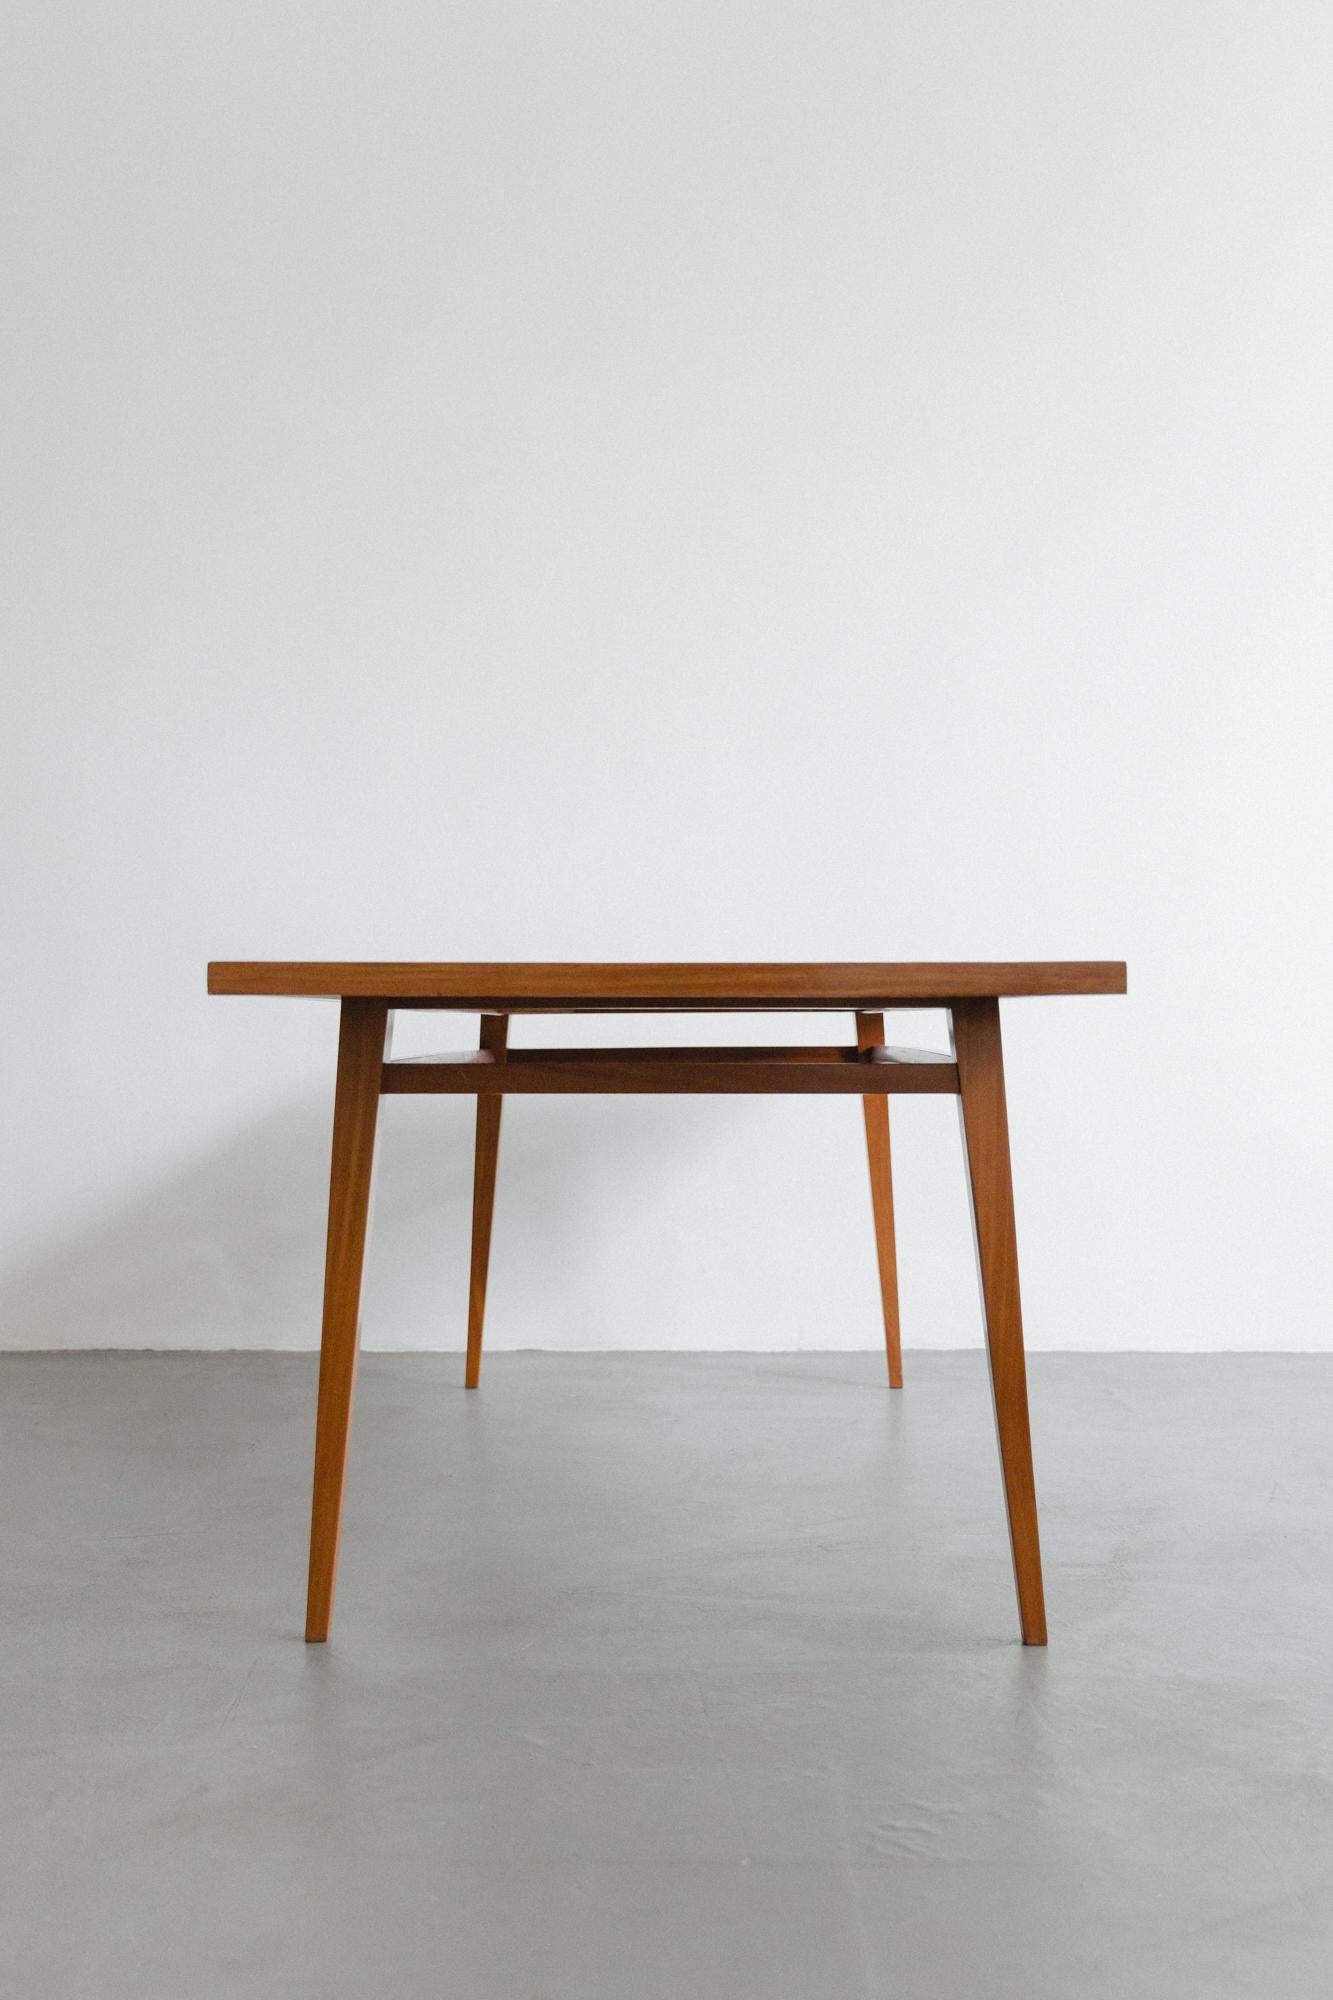 Brazilian Hardwood Table by Joaquim Tenreiro, 1947, Midcentury Design In Good Condition For Sale In New York, NY